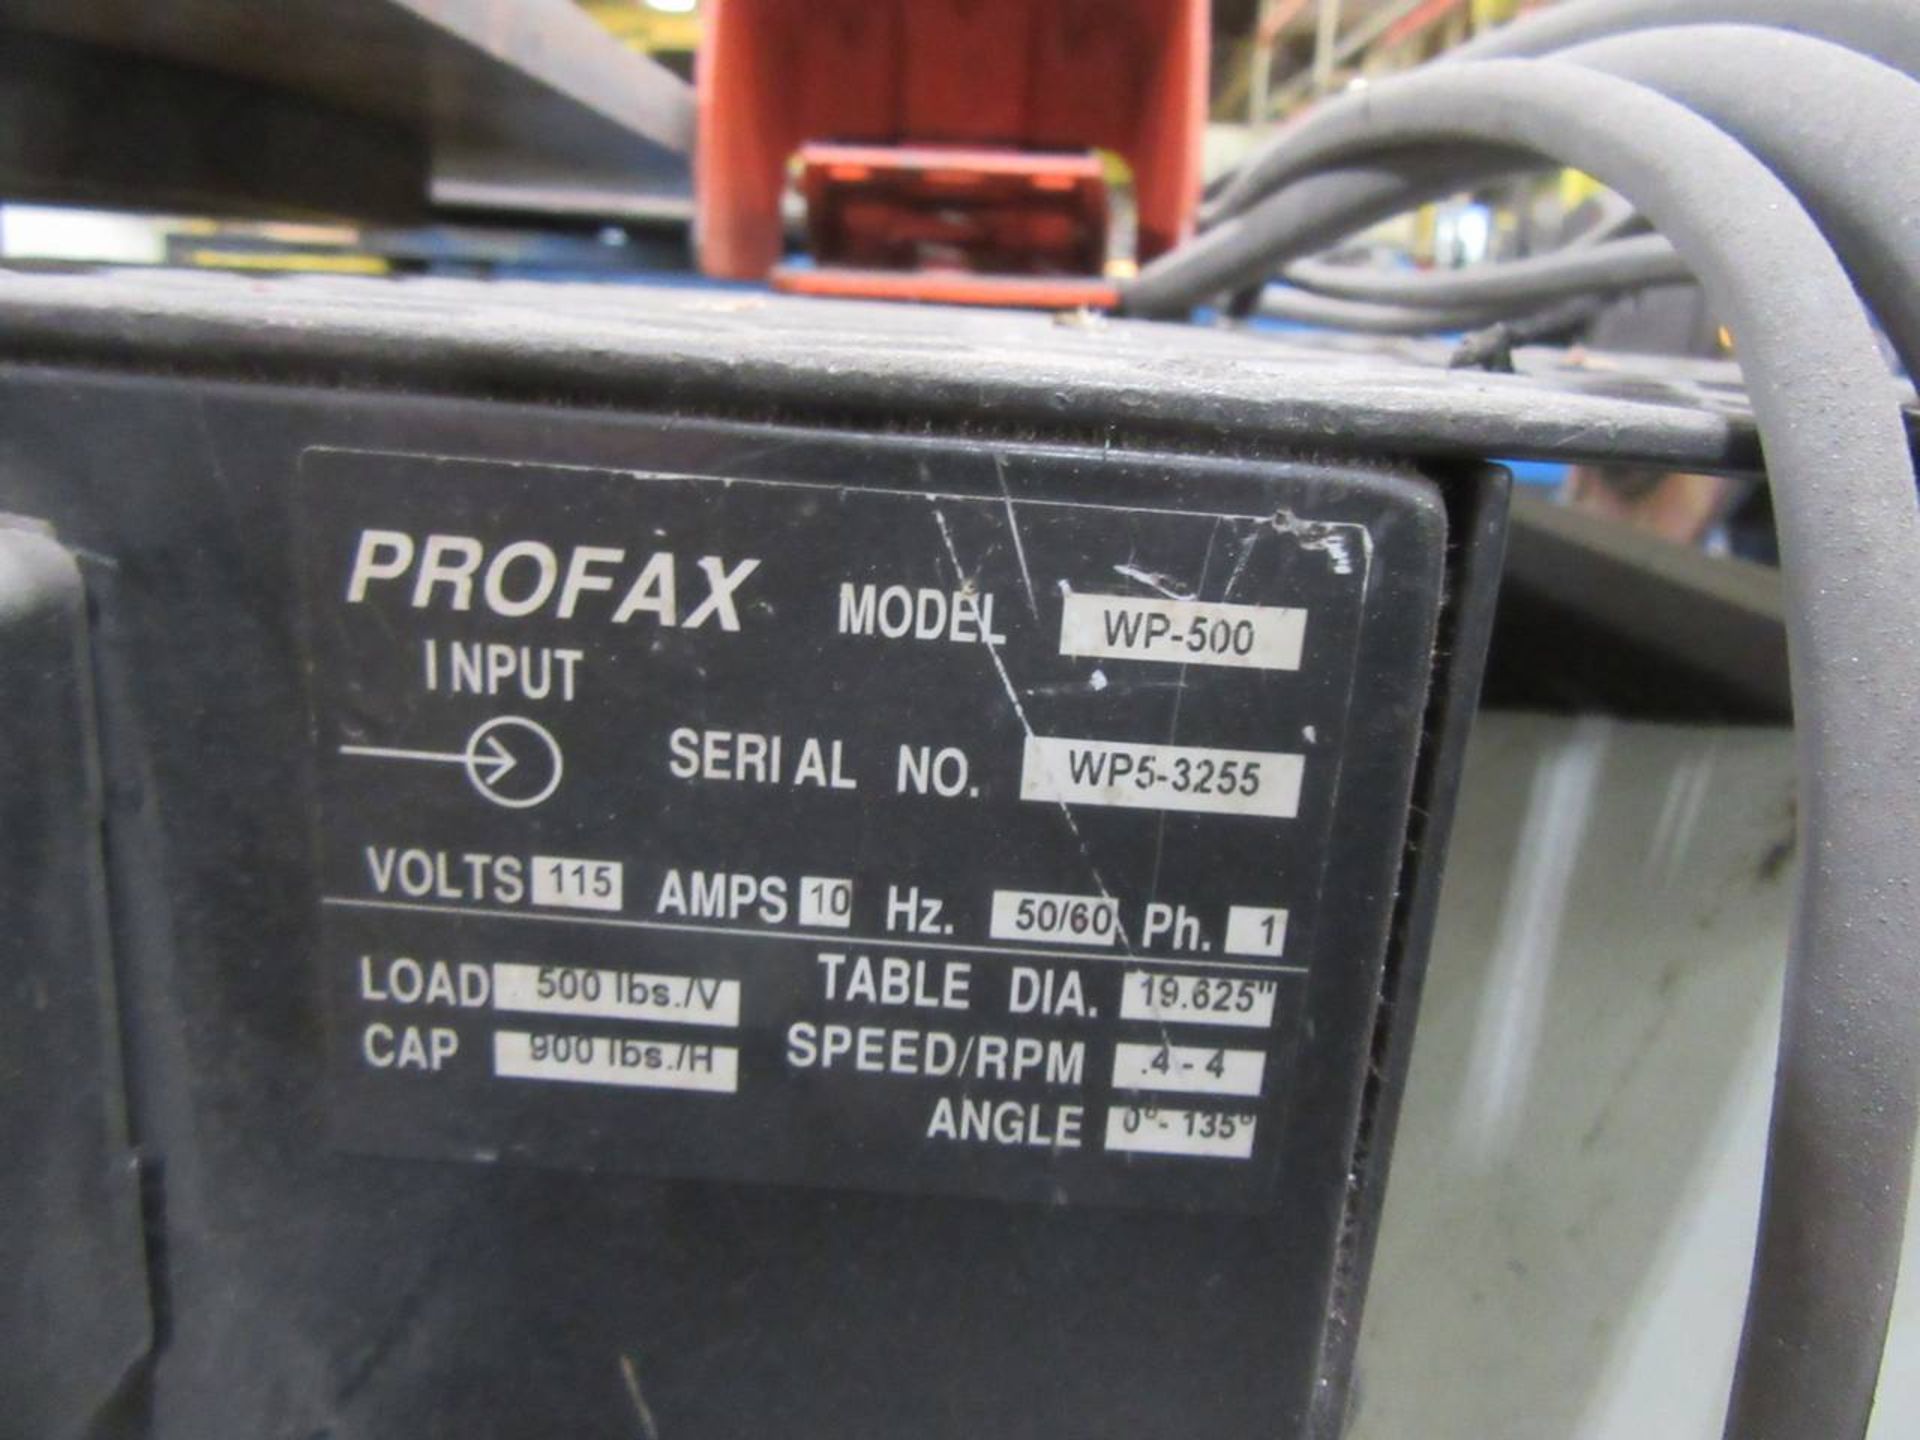 2015 Profax WP-500 Welding Positioner - Image 4 of 4